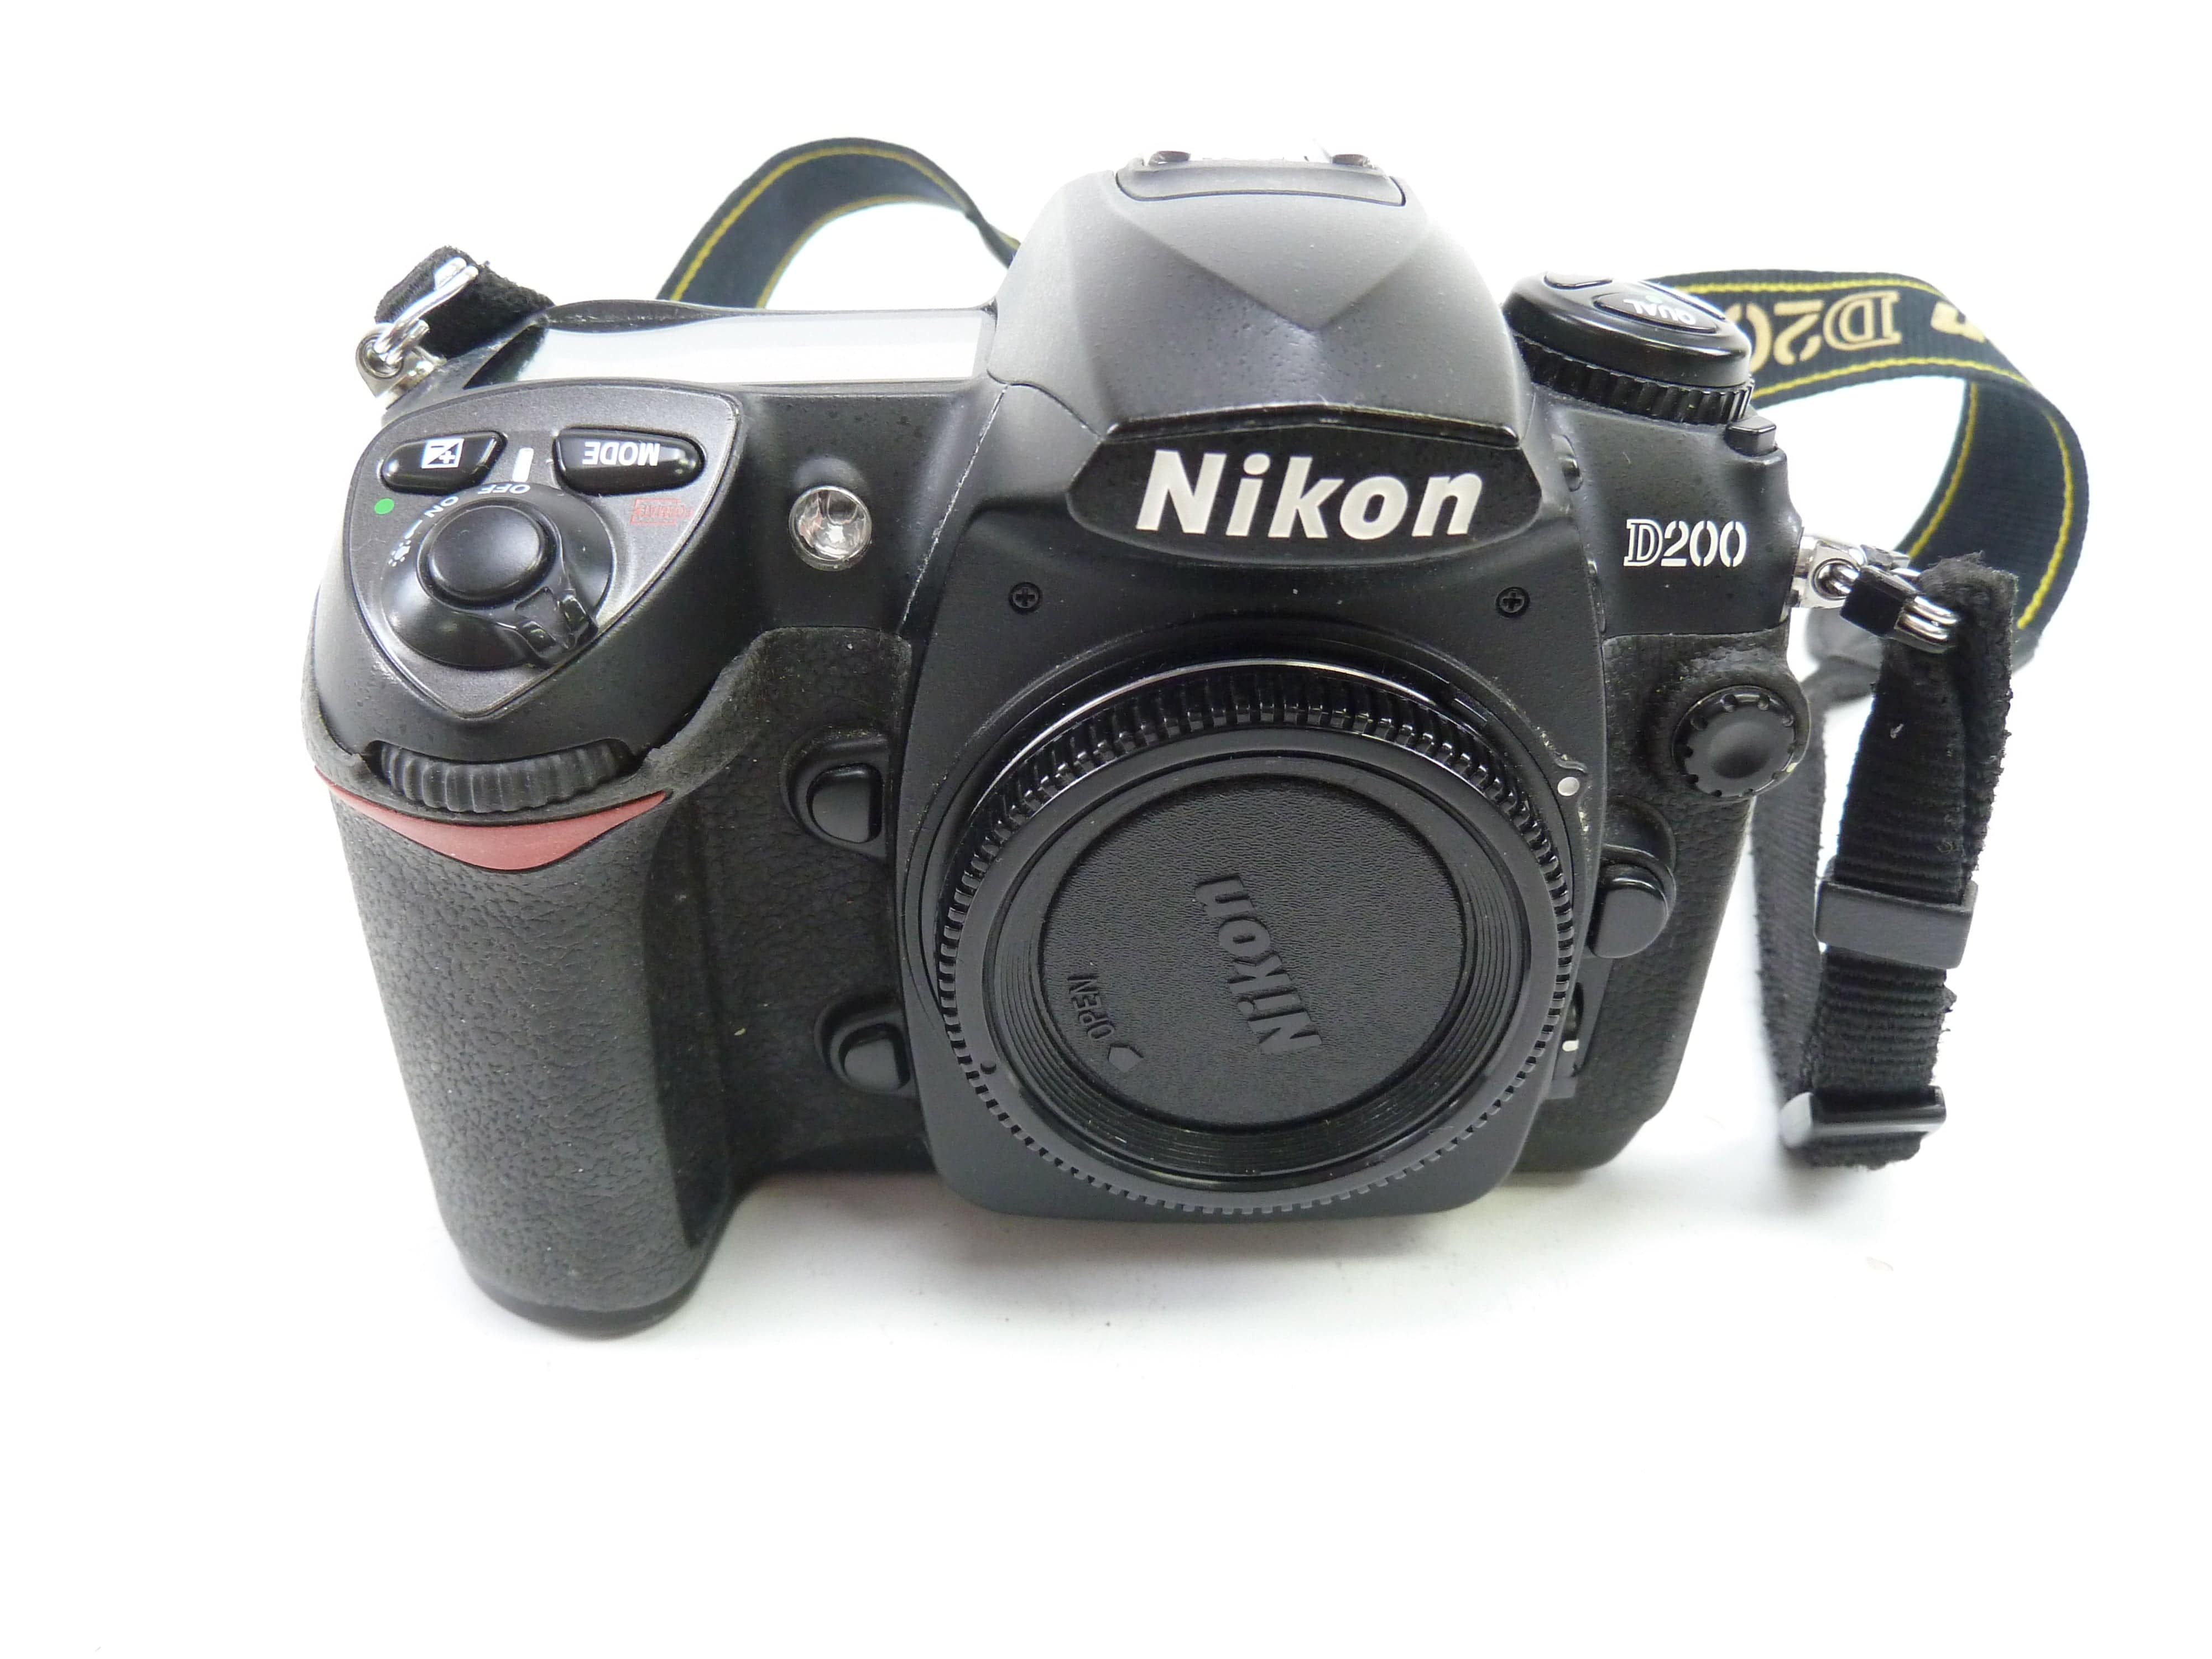 Nikon D200 full specifications - Digital Photography Review